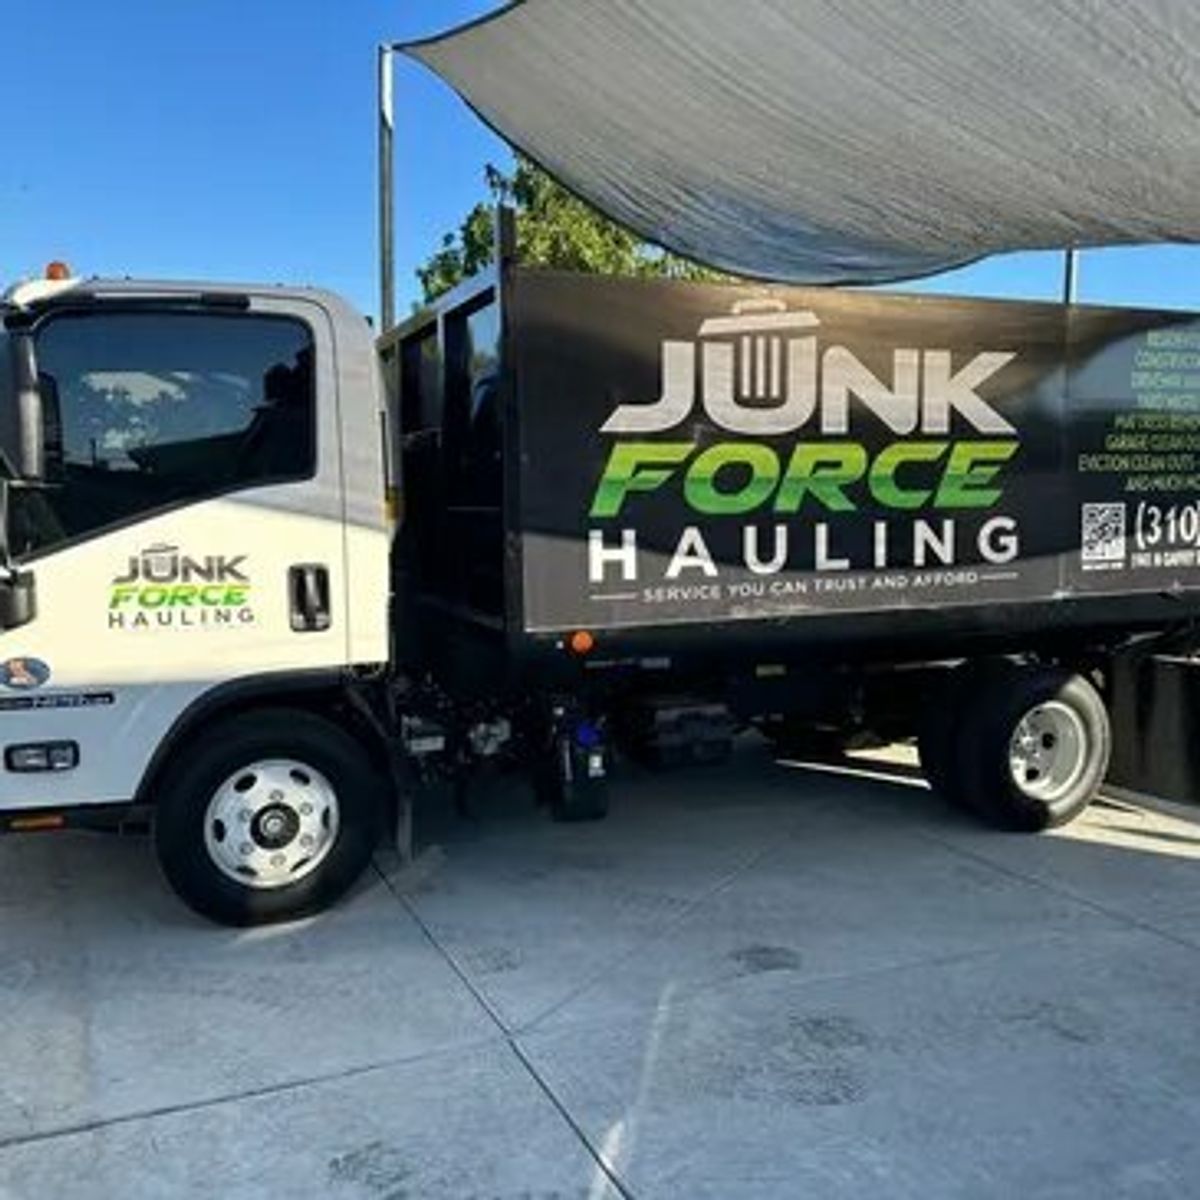 6 Benefits of Professional Junk Removal Hauling Services — Junk Force - Buymeacoffee